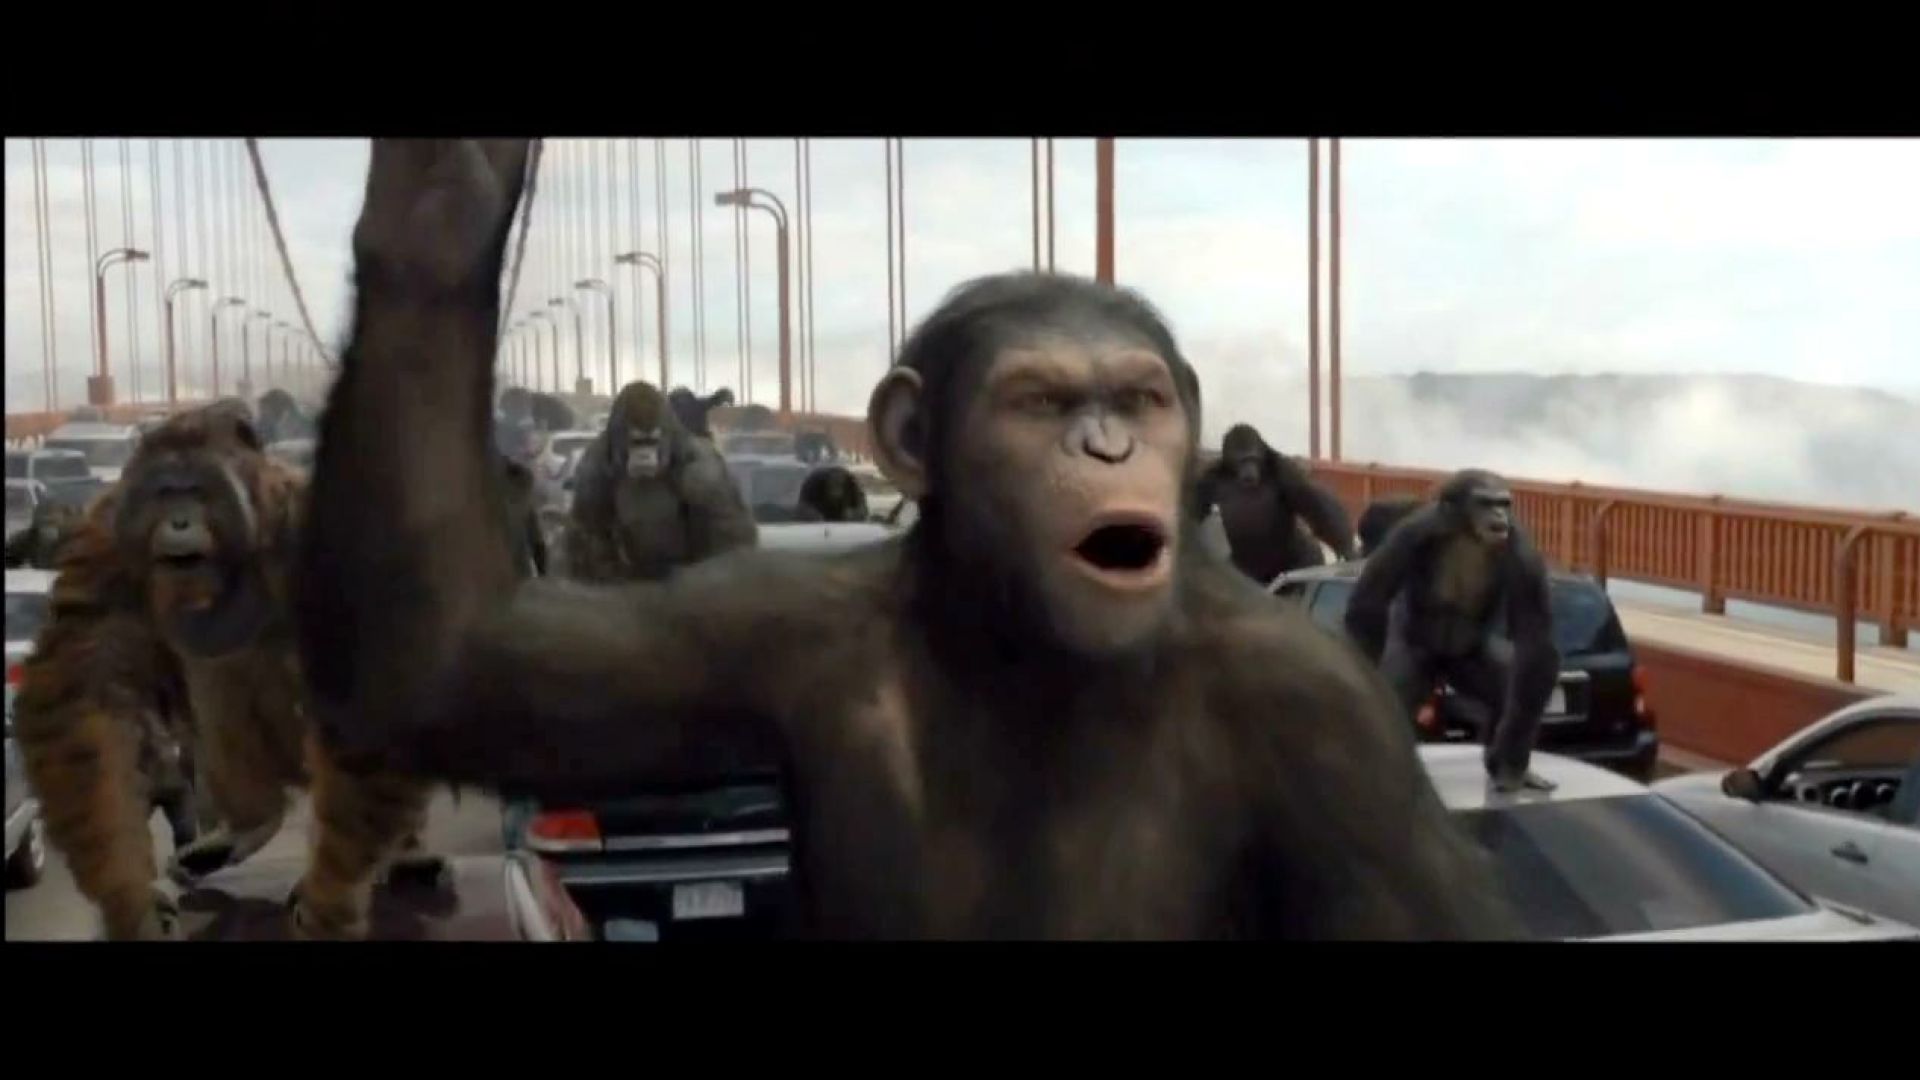 They rise. We fall. Rise of the Planet of the Apes